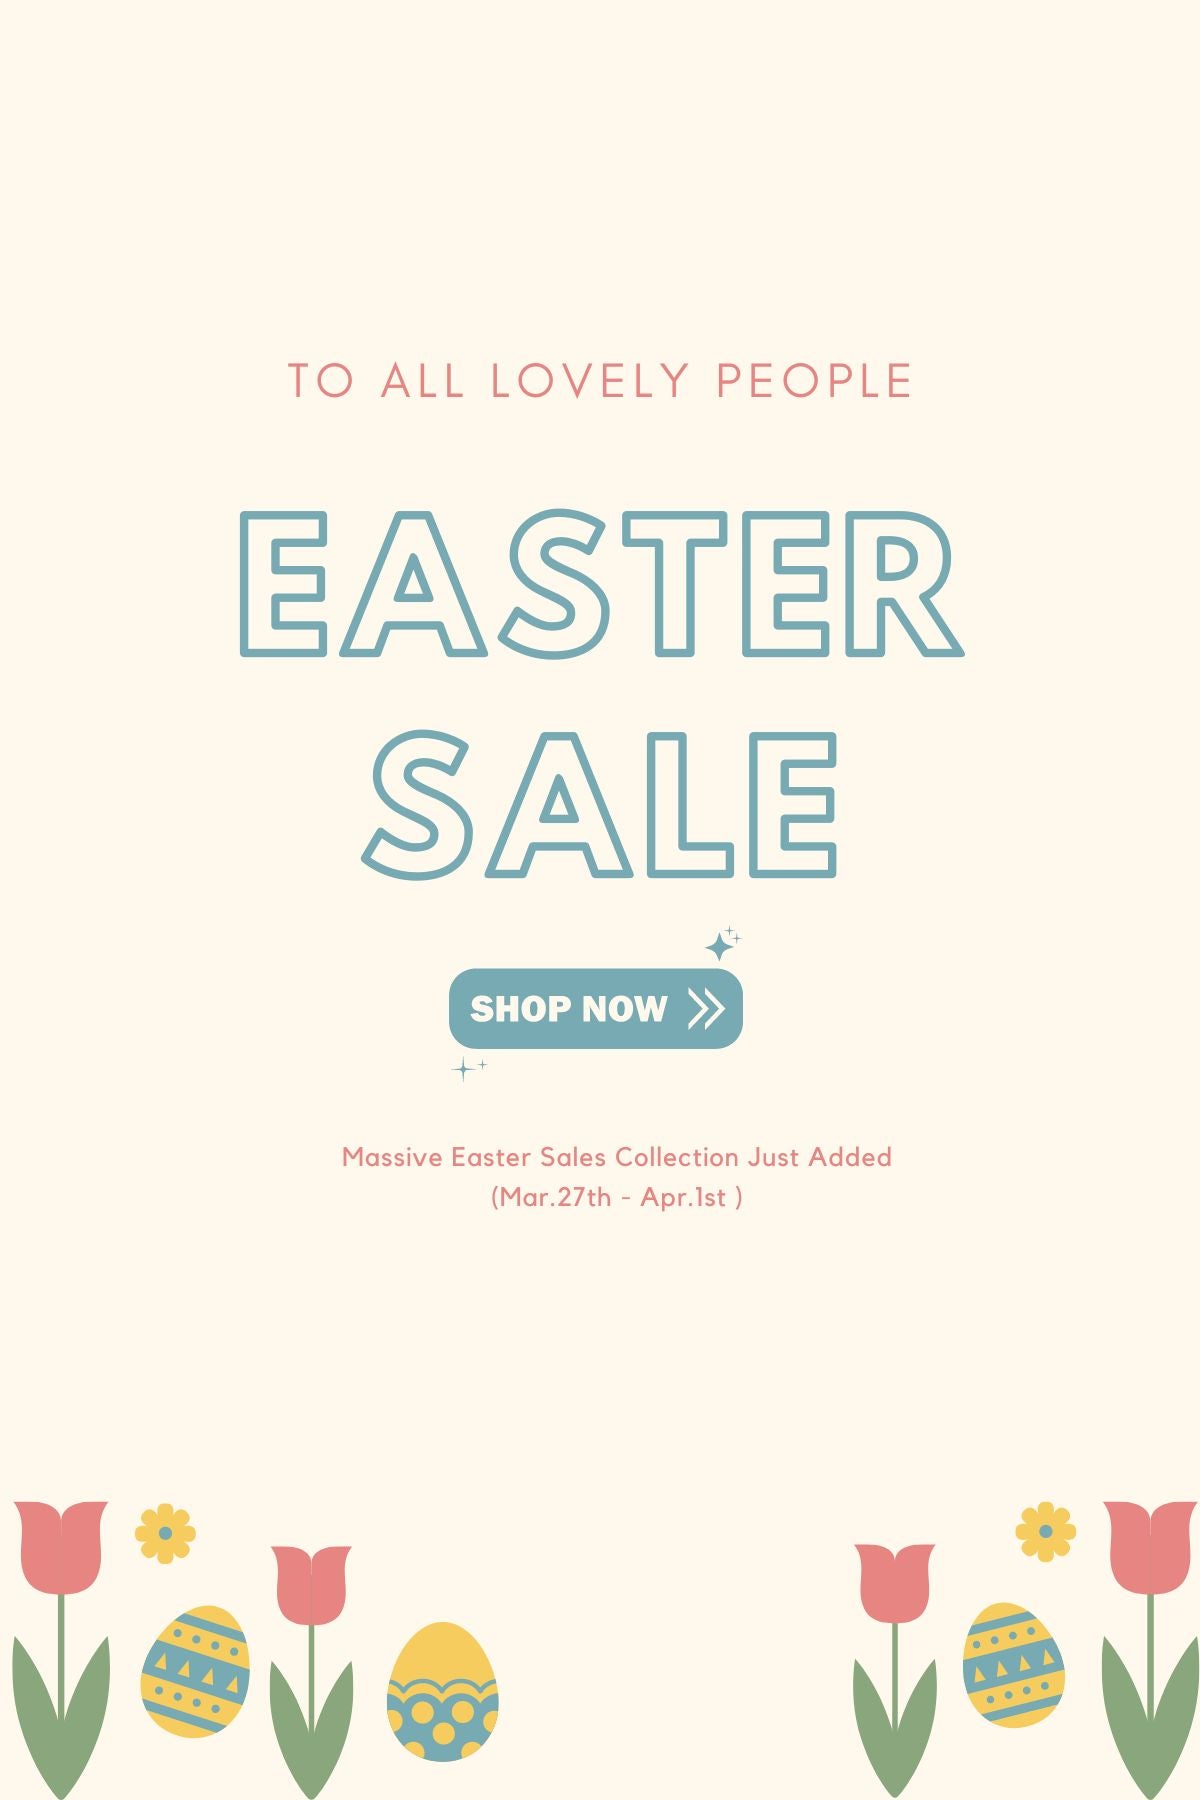 Easter Sale up to 60% off